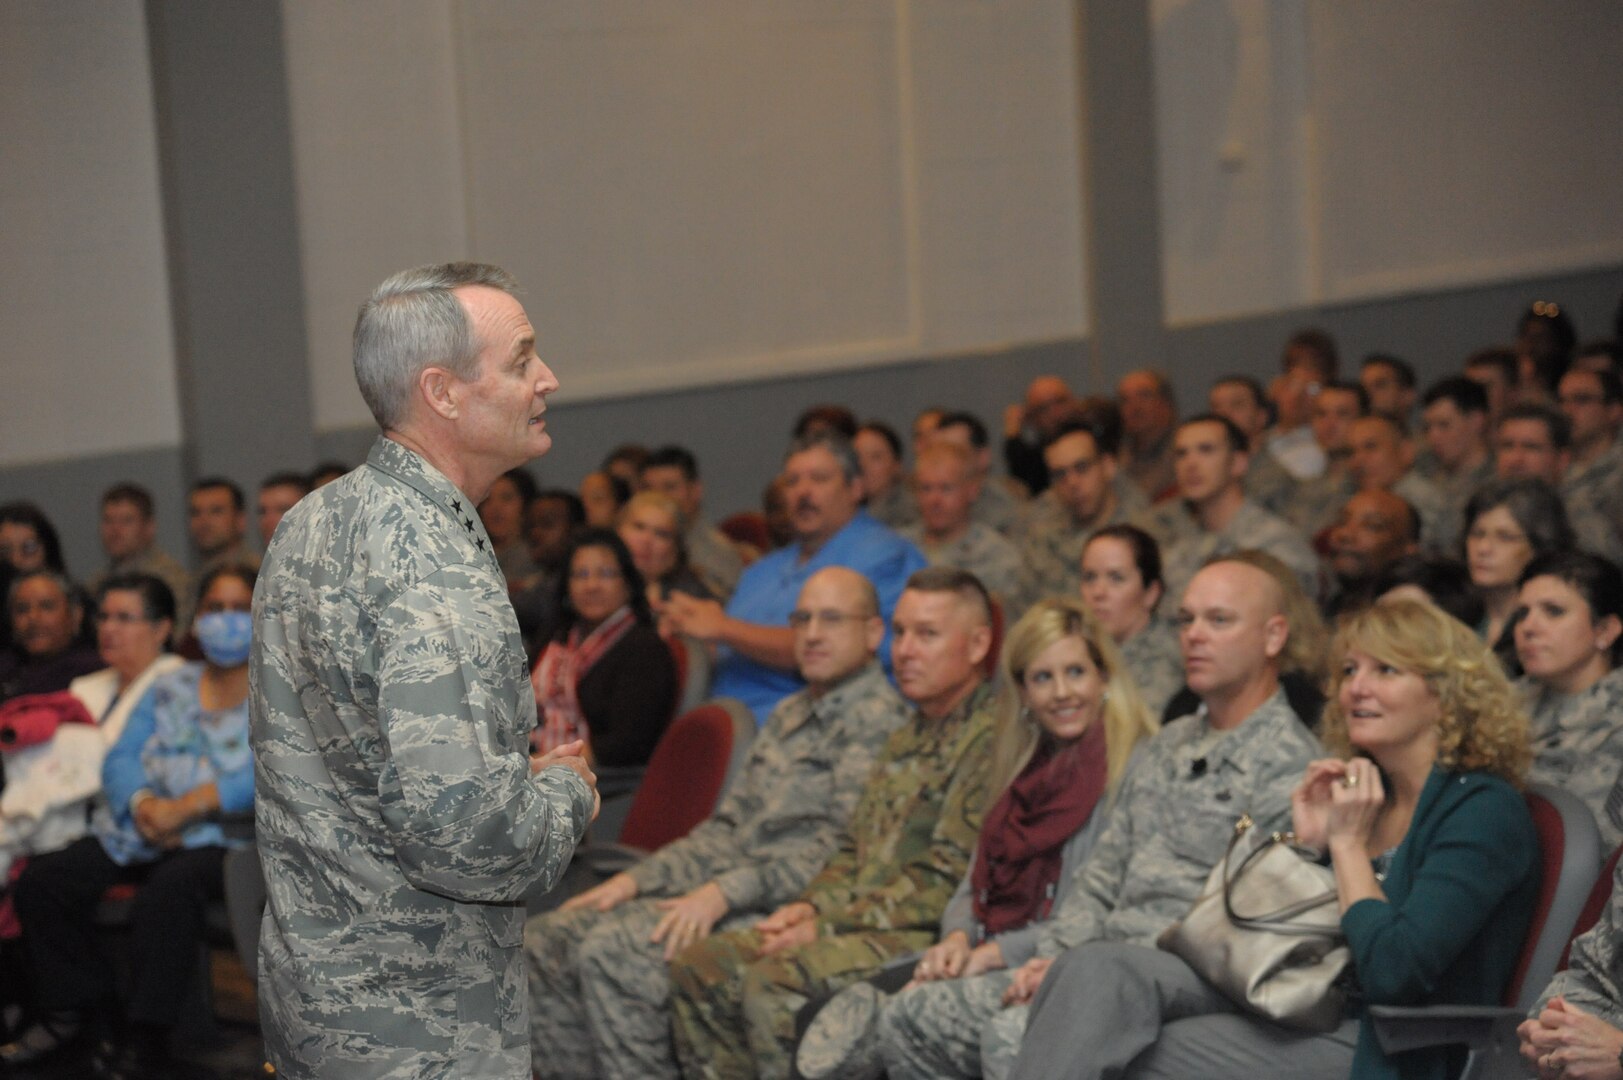 Lt. Gen. Darryl Roberson, Commander of Air Education and Training Command, briefs members of the 502nd Air Base Wing during an all call at the Bob Hope Theater Jan. 21, Joint Base San Antonio-Lackland.  Roberson was provided a 502nd ABW immersion tour where he visited units throughout JBSA-Randolph, Lackland and Fort Sam Houston, Jan. 20-22.  The 502nd ABW is responsible for installation support across all JBSA locations.  (U.S. Air Force photo by Joel Martinez)